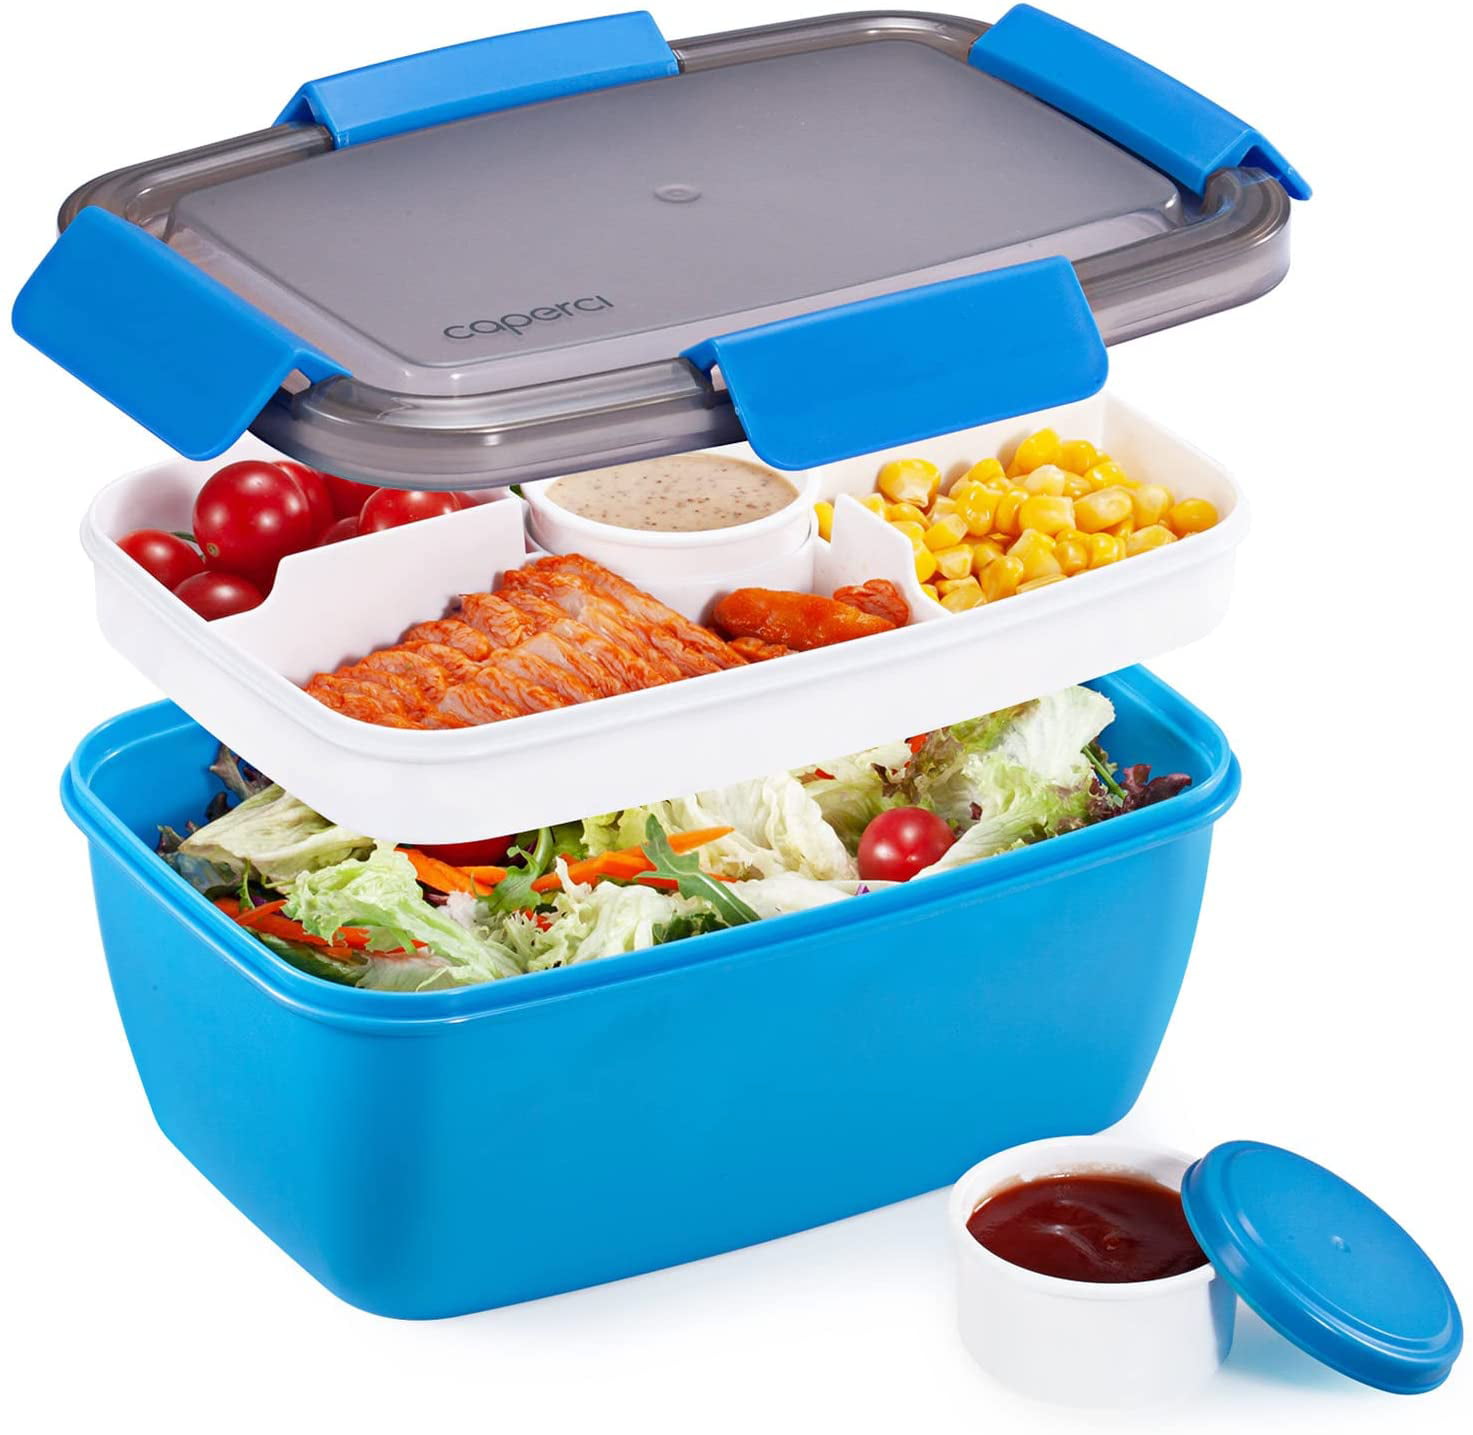 Caperci Stackable Salad Container for Lunch, Leakproof Adult Bento Lunch Box  68-oz, 5-Compartment Tray, 2pcs 3-oz Sauce Cups, BPA-Free (Blue) 